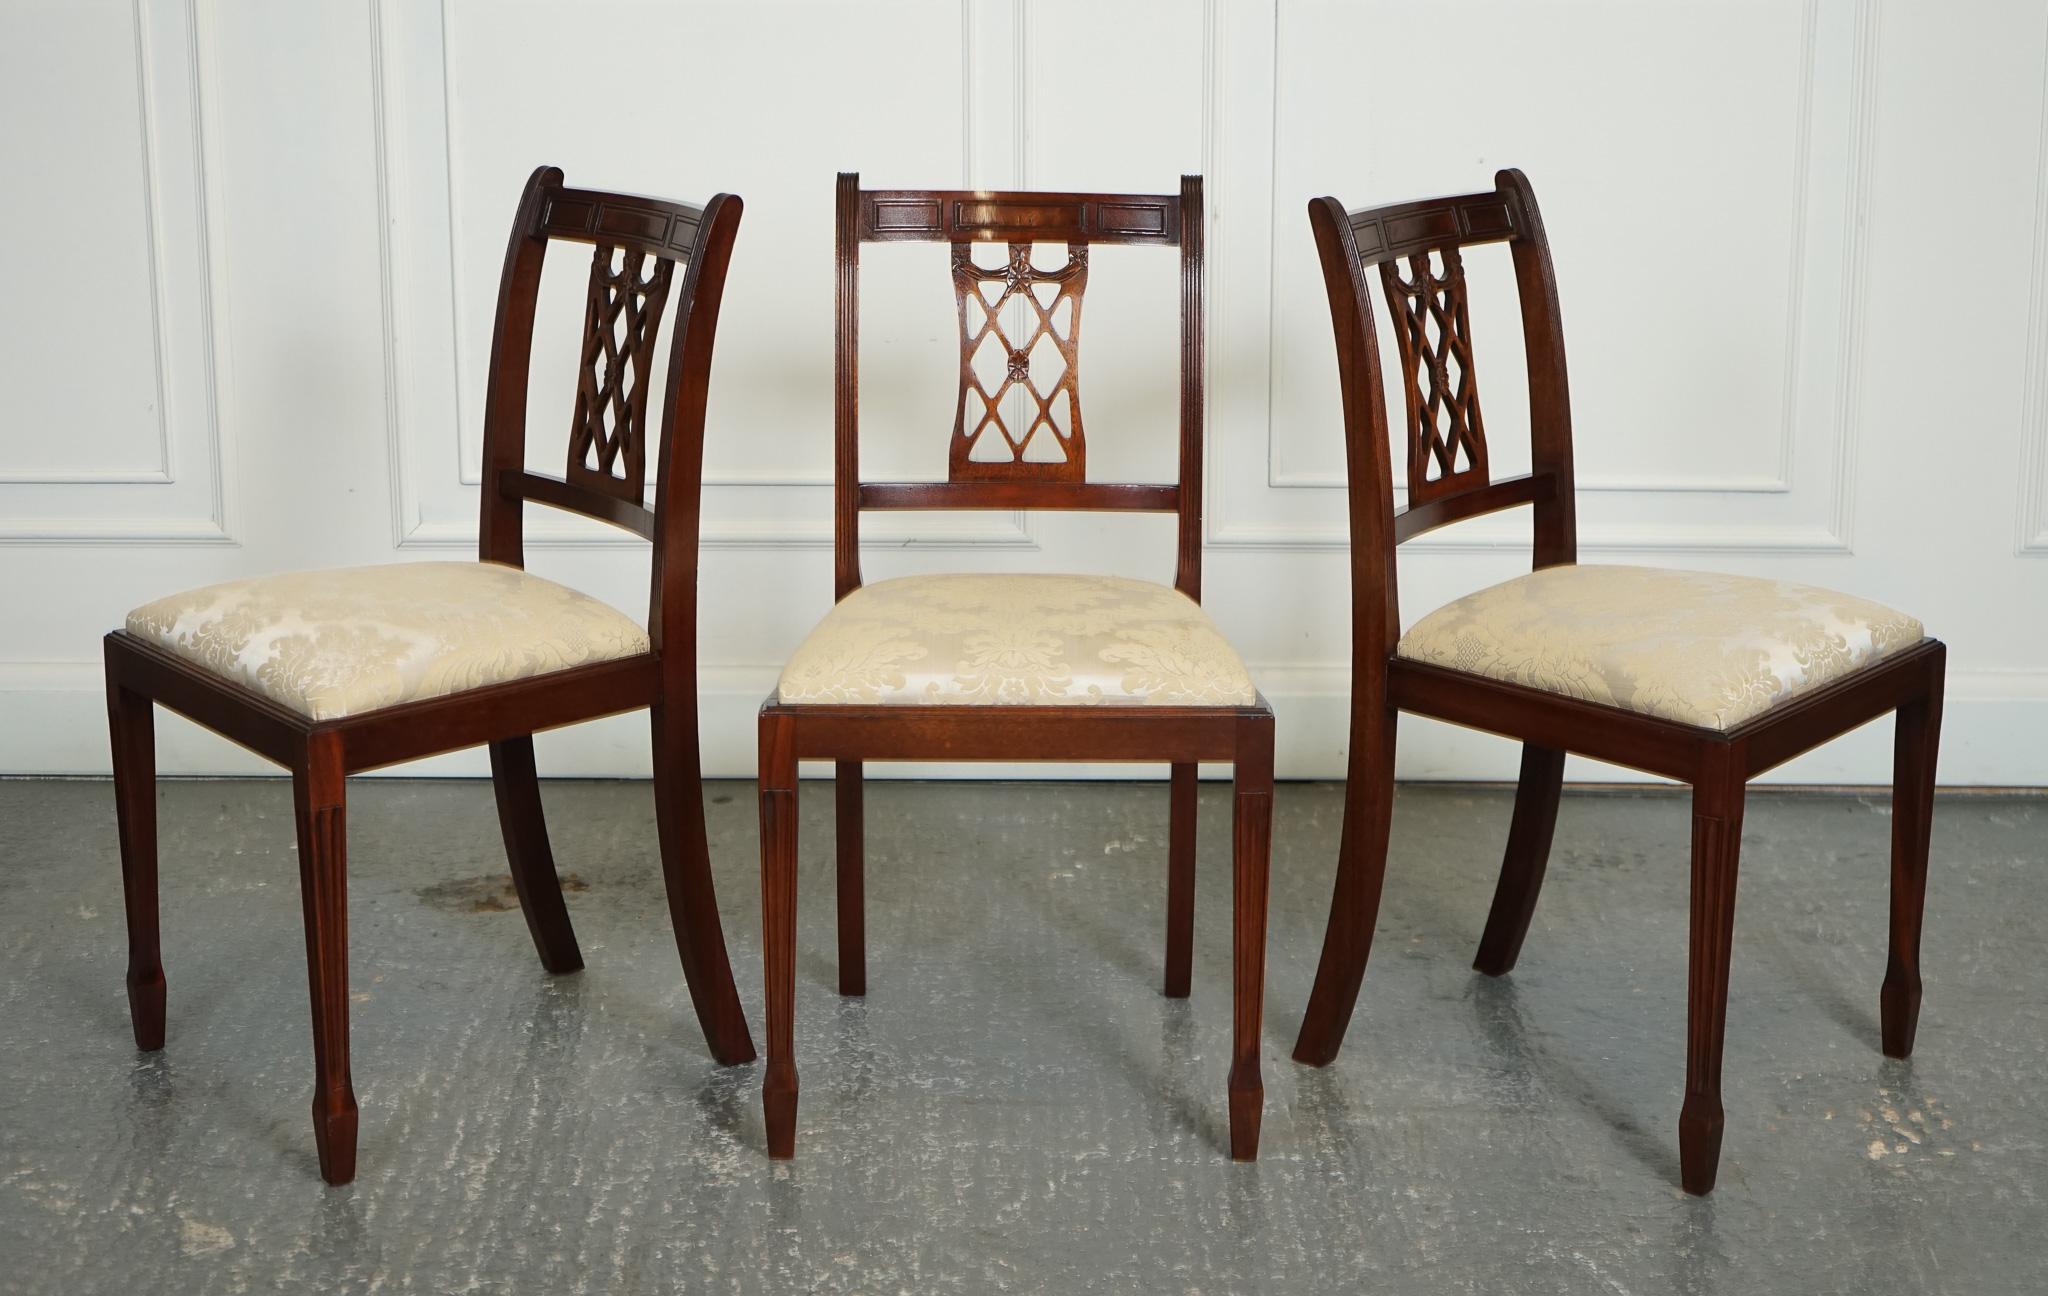 Hepplewhite HEPPLEWHITE STYLE BEVAN FUNNELL SET OF 5 DINING CHAiRS CREAM UPHOLSTERED SEATS For Sale